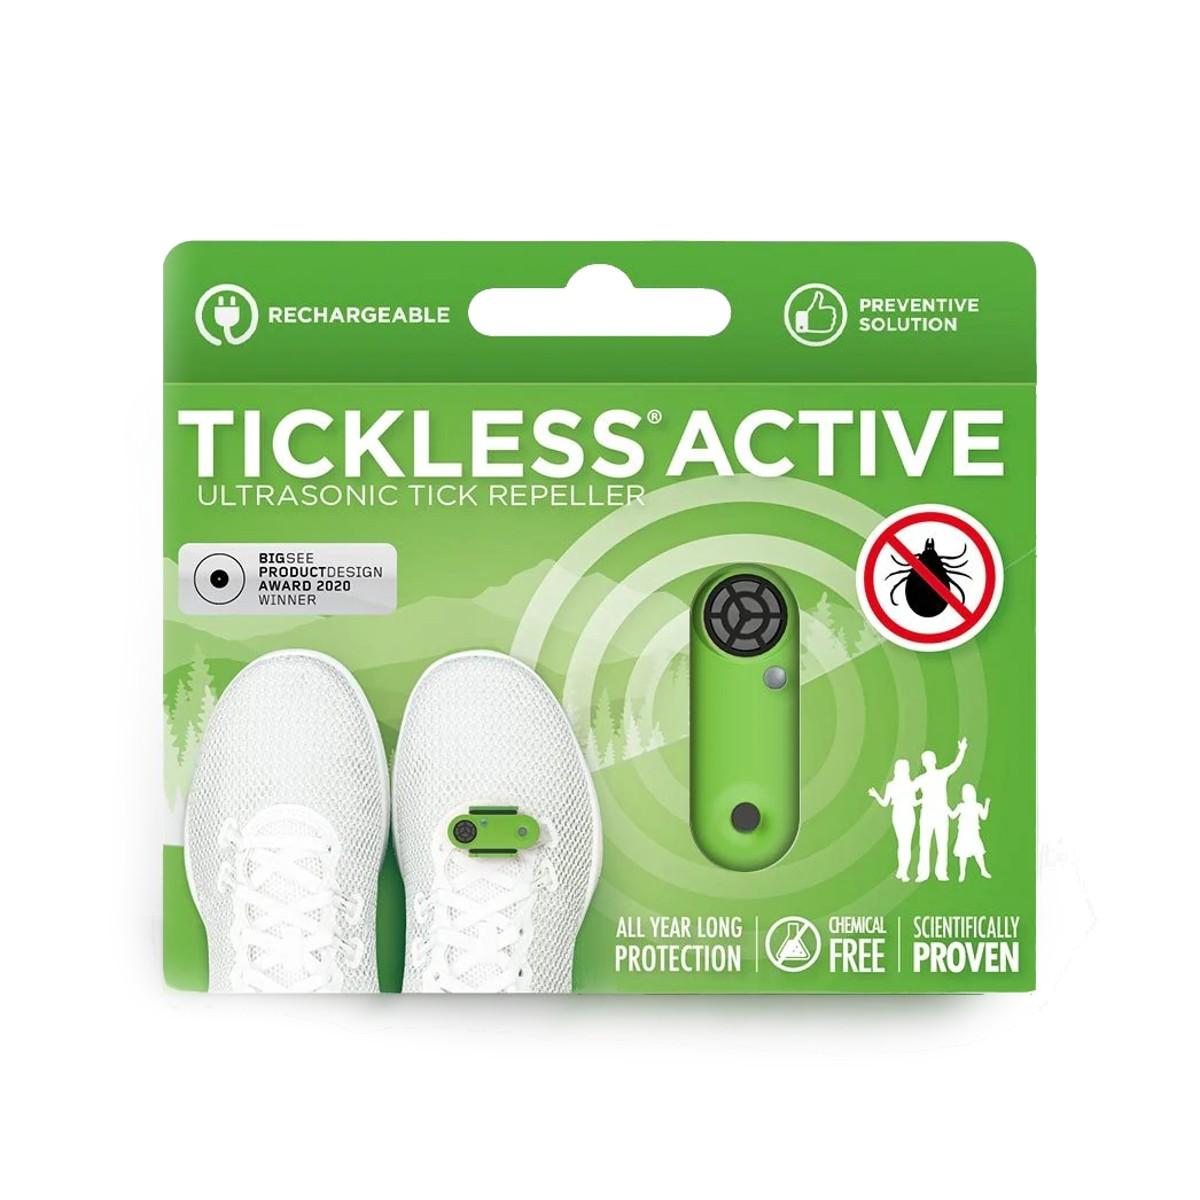 Tickless Tags Active Human Tick Repellent - Green